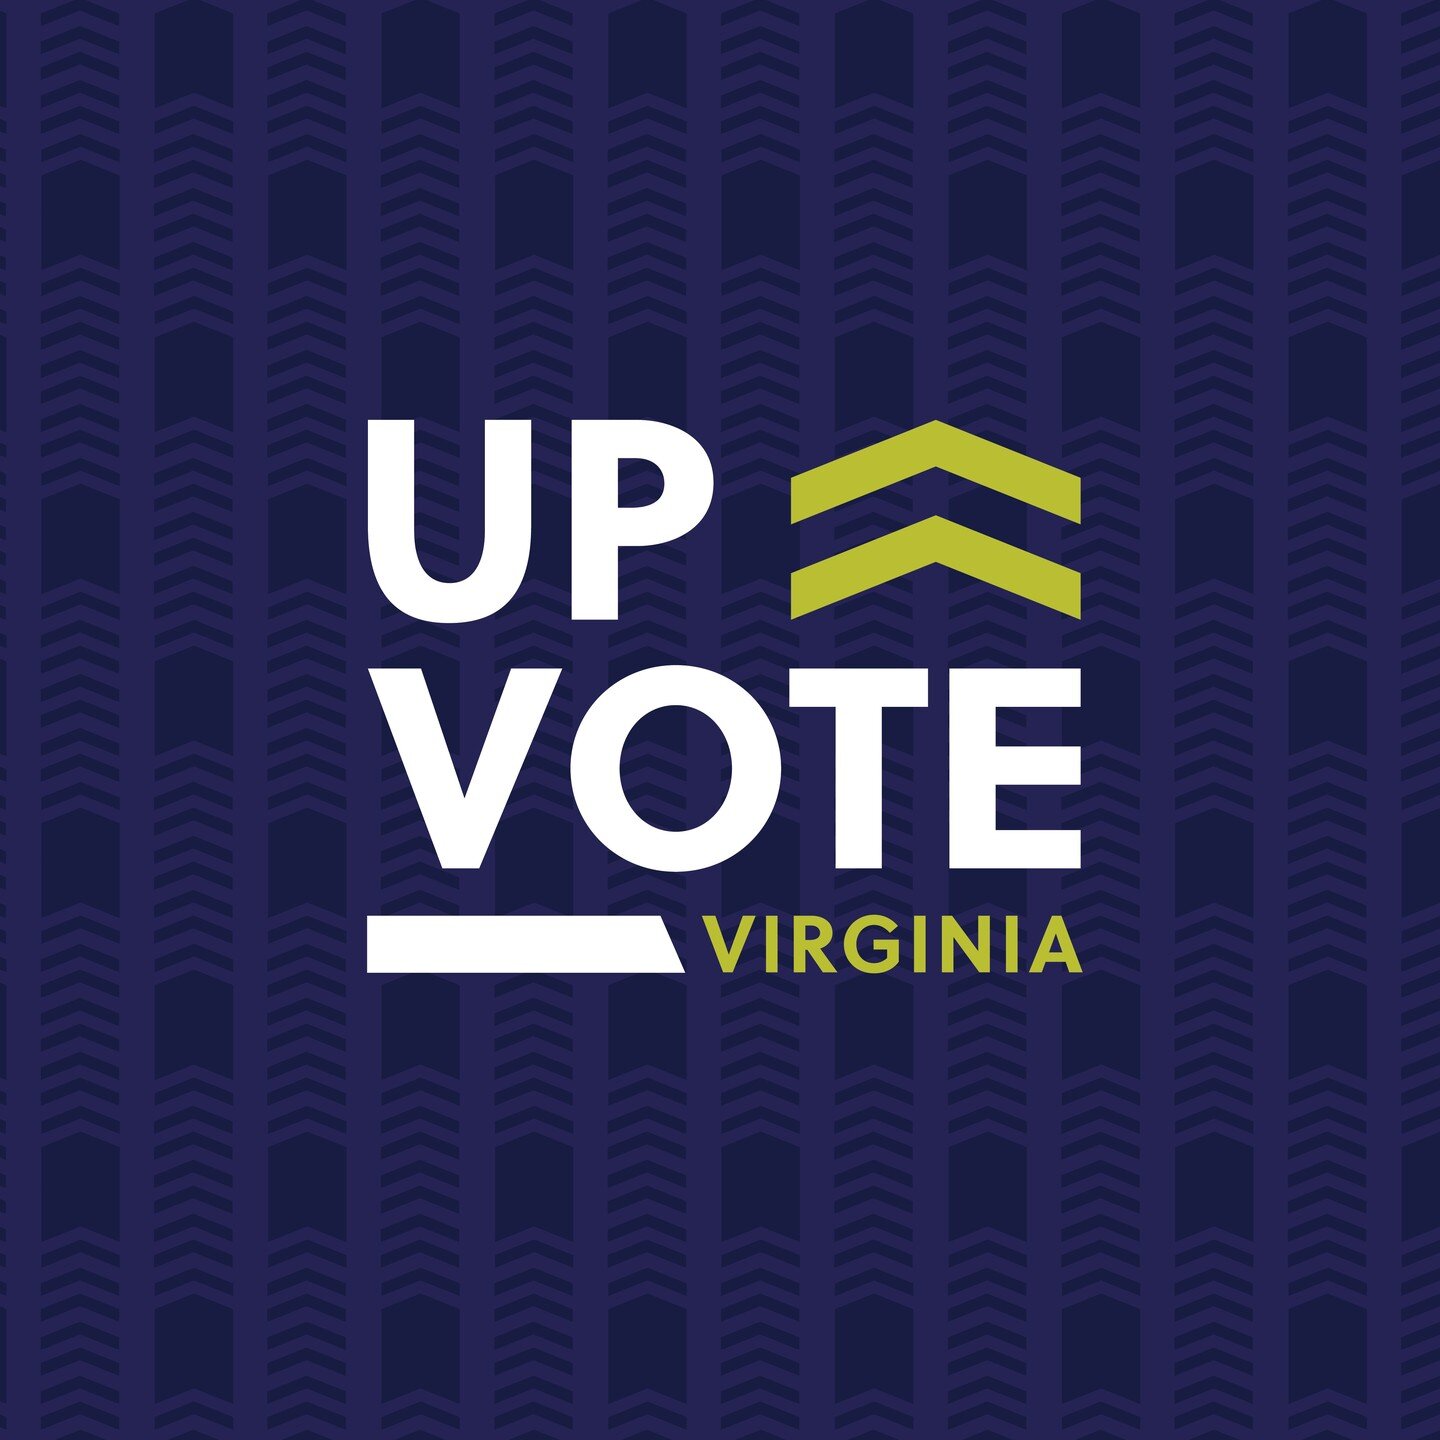 Introducing #UpVoteVA -- a newly-formed nonpartisan democracy reform collective aiming to elevate the voices of Virginia voters through making elections stronger and more equitable. See our launch video here: https://youtu.be/Pw8uAsyPNGg